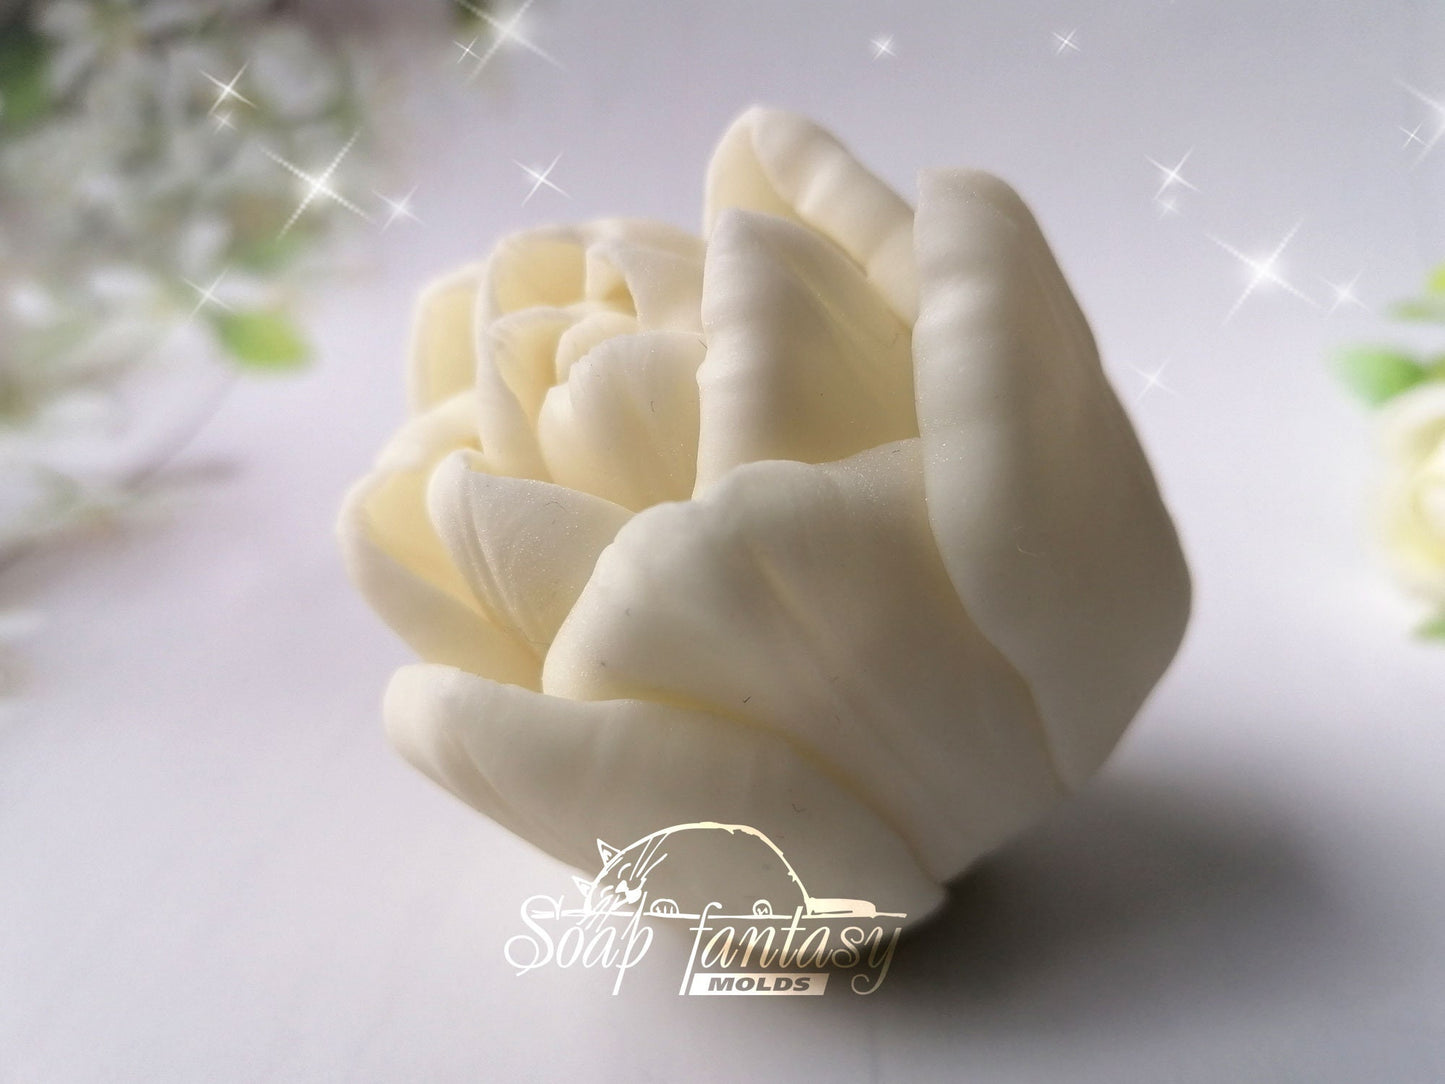 Tulip "Mondial" silicone mold for soap making